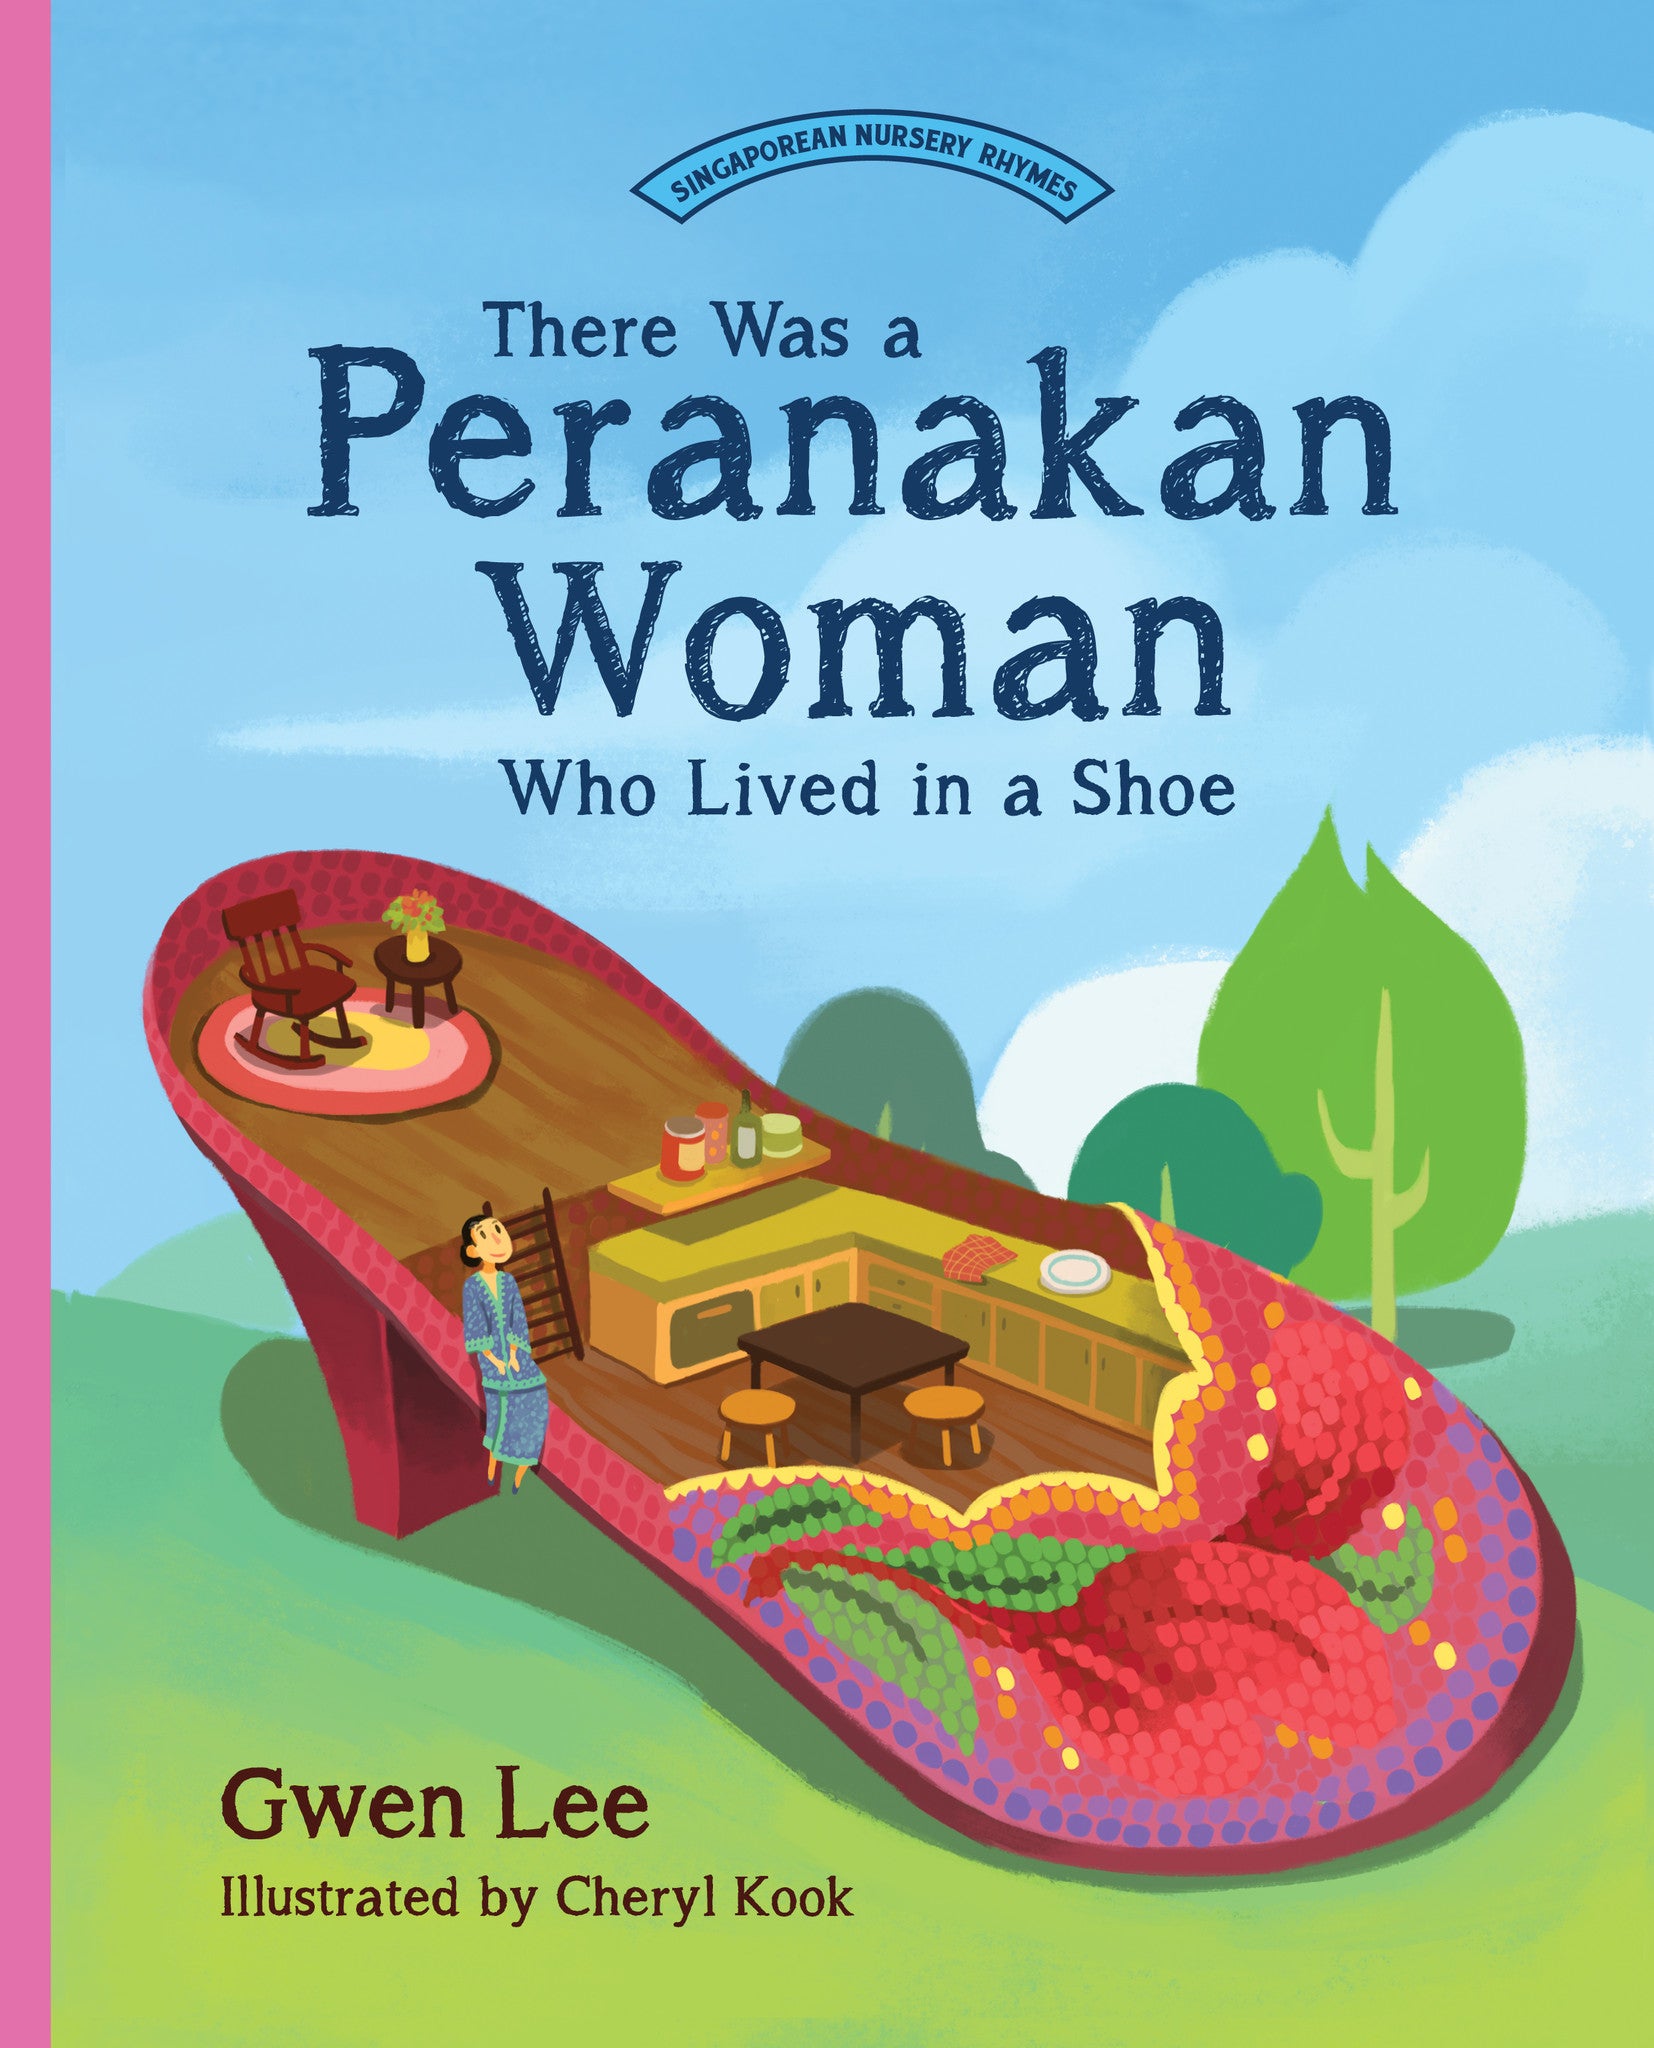 There Was a Peranakan Woman Who Lived in a Shoe